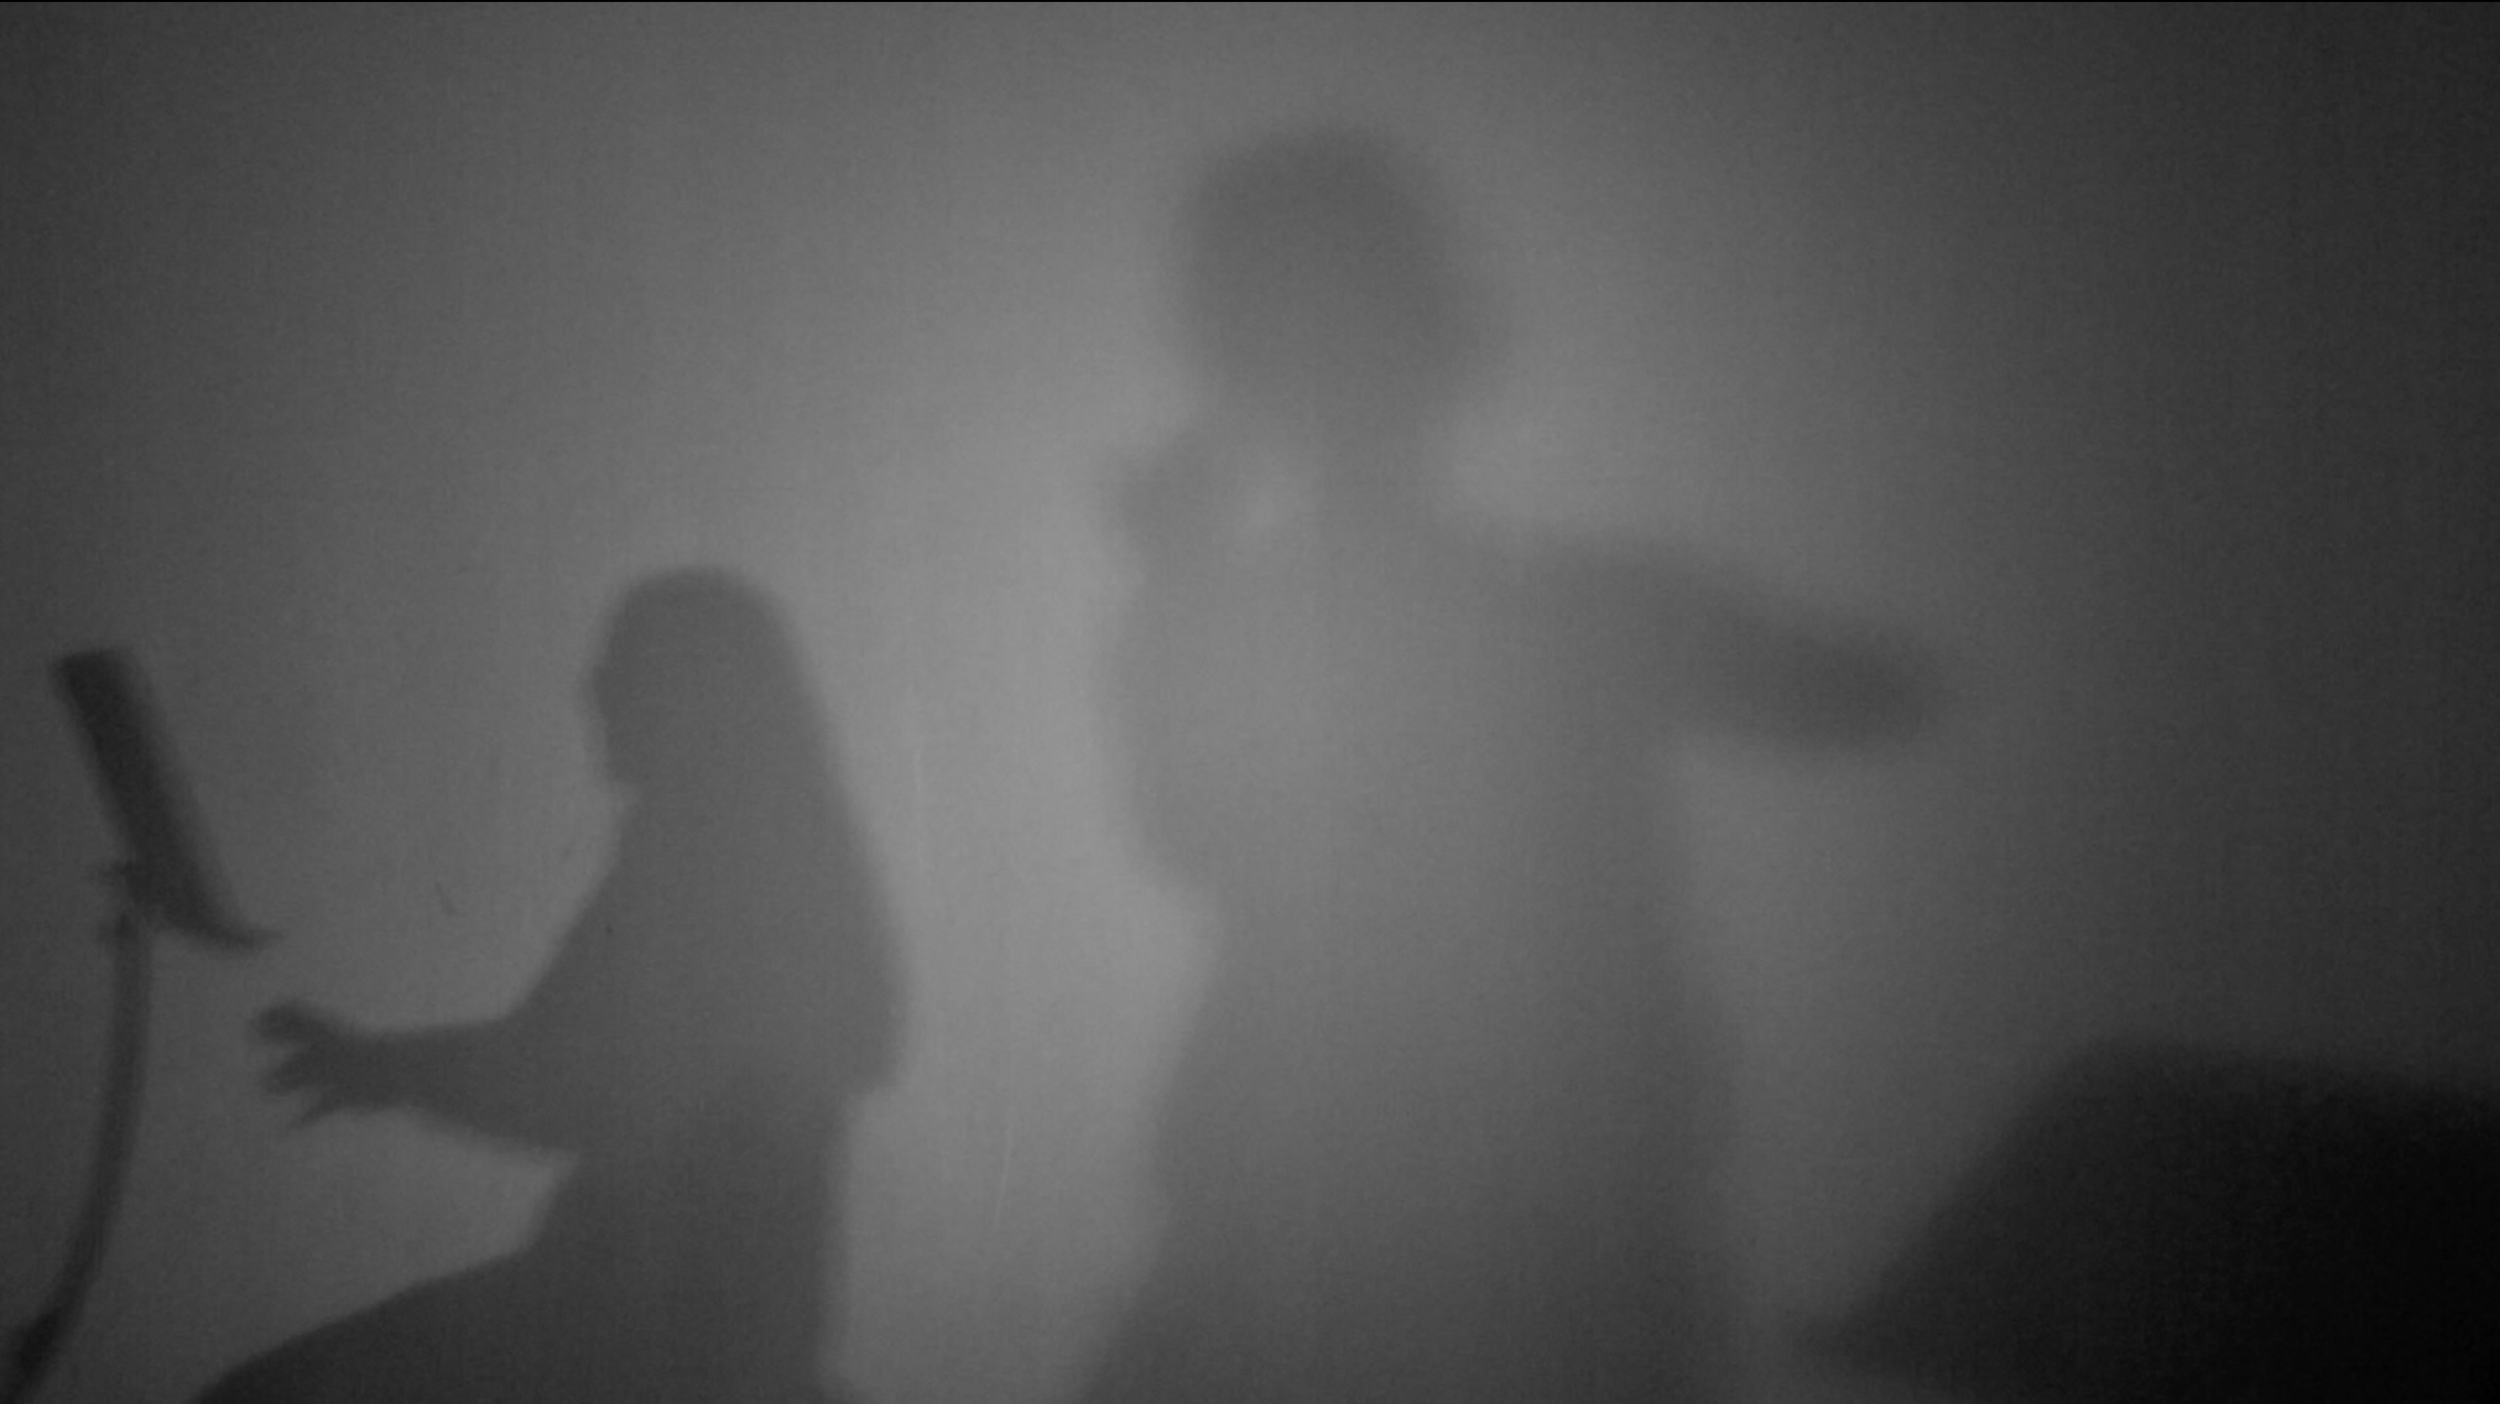 Video Still from "Obscura," 2019, performance of "Morpheus,'" by Rebecca Clarke, without instruments